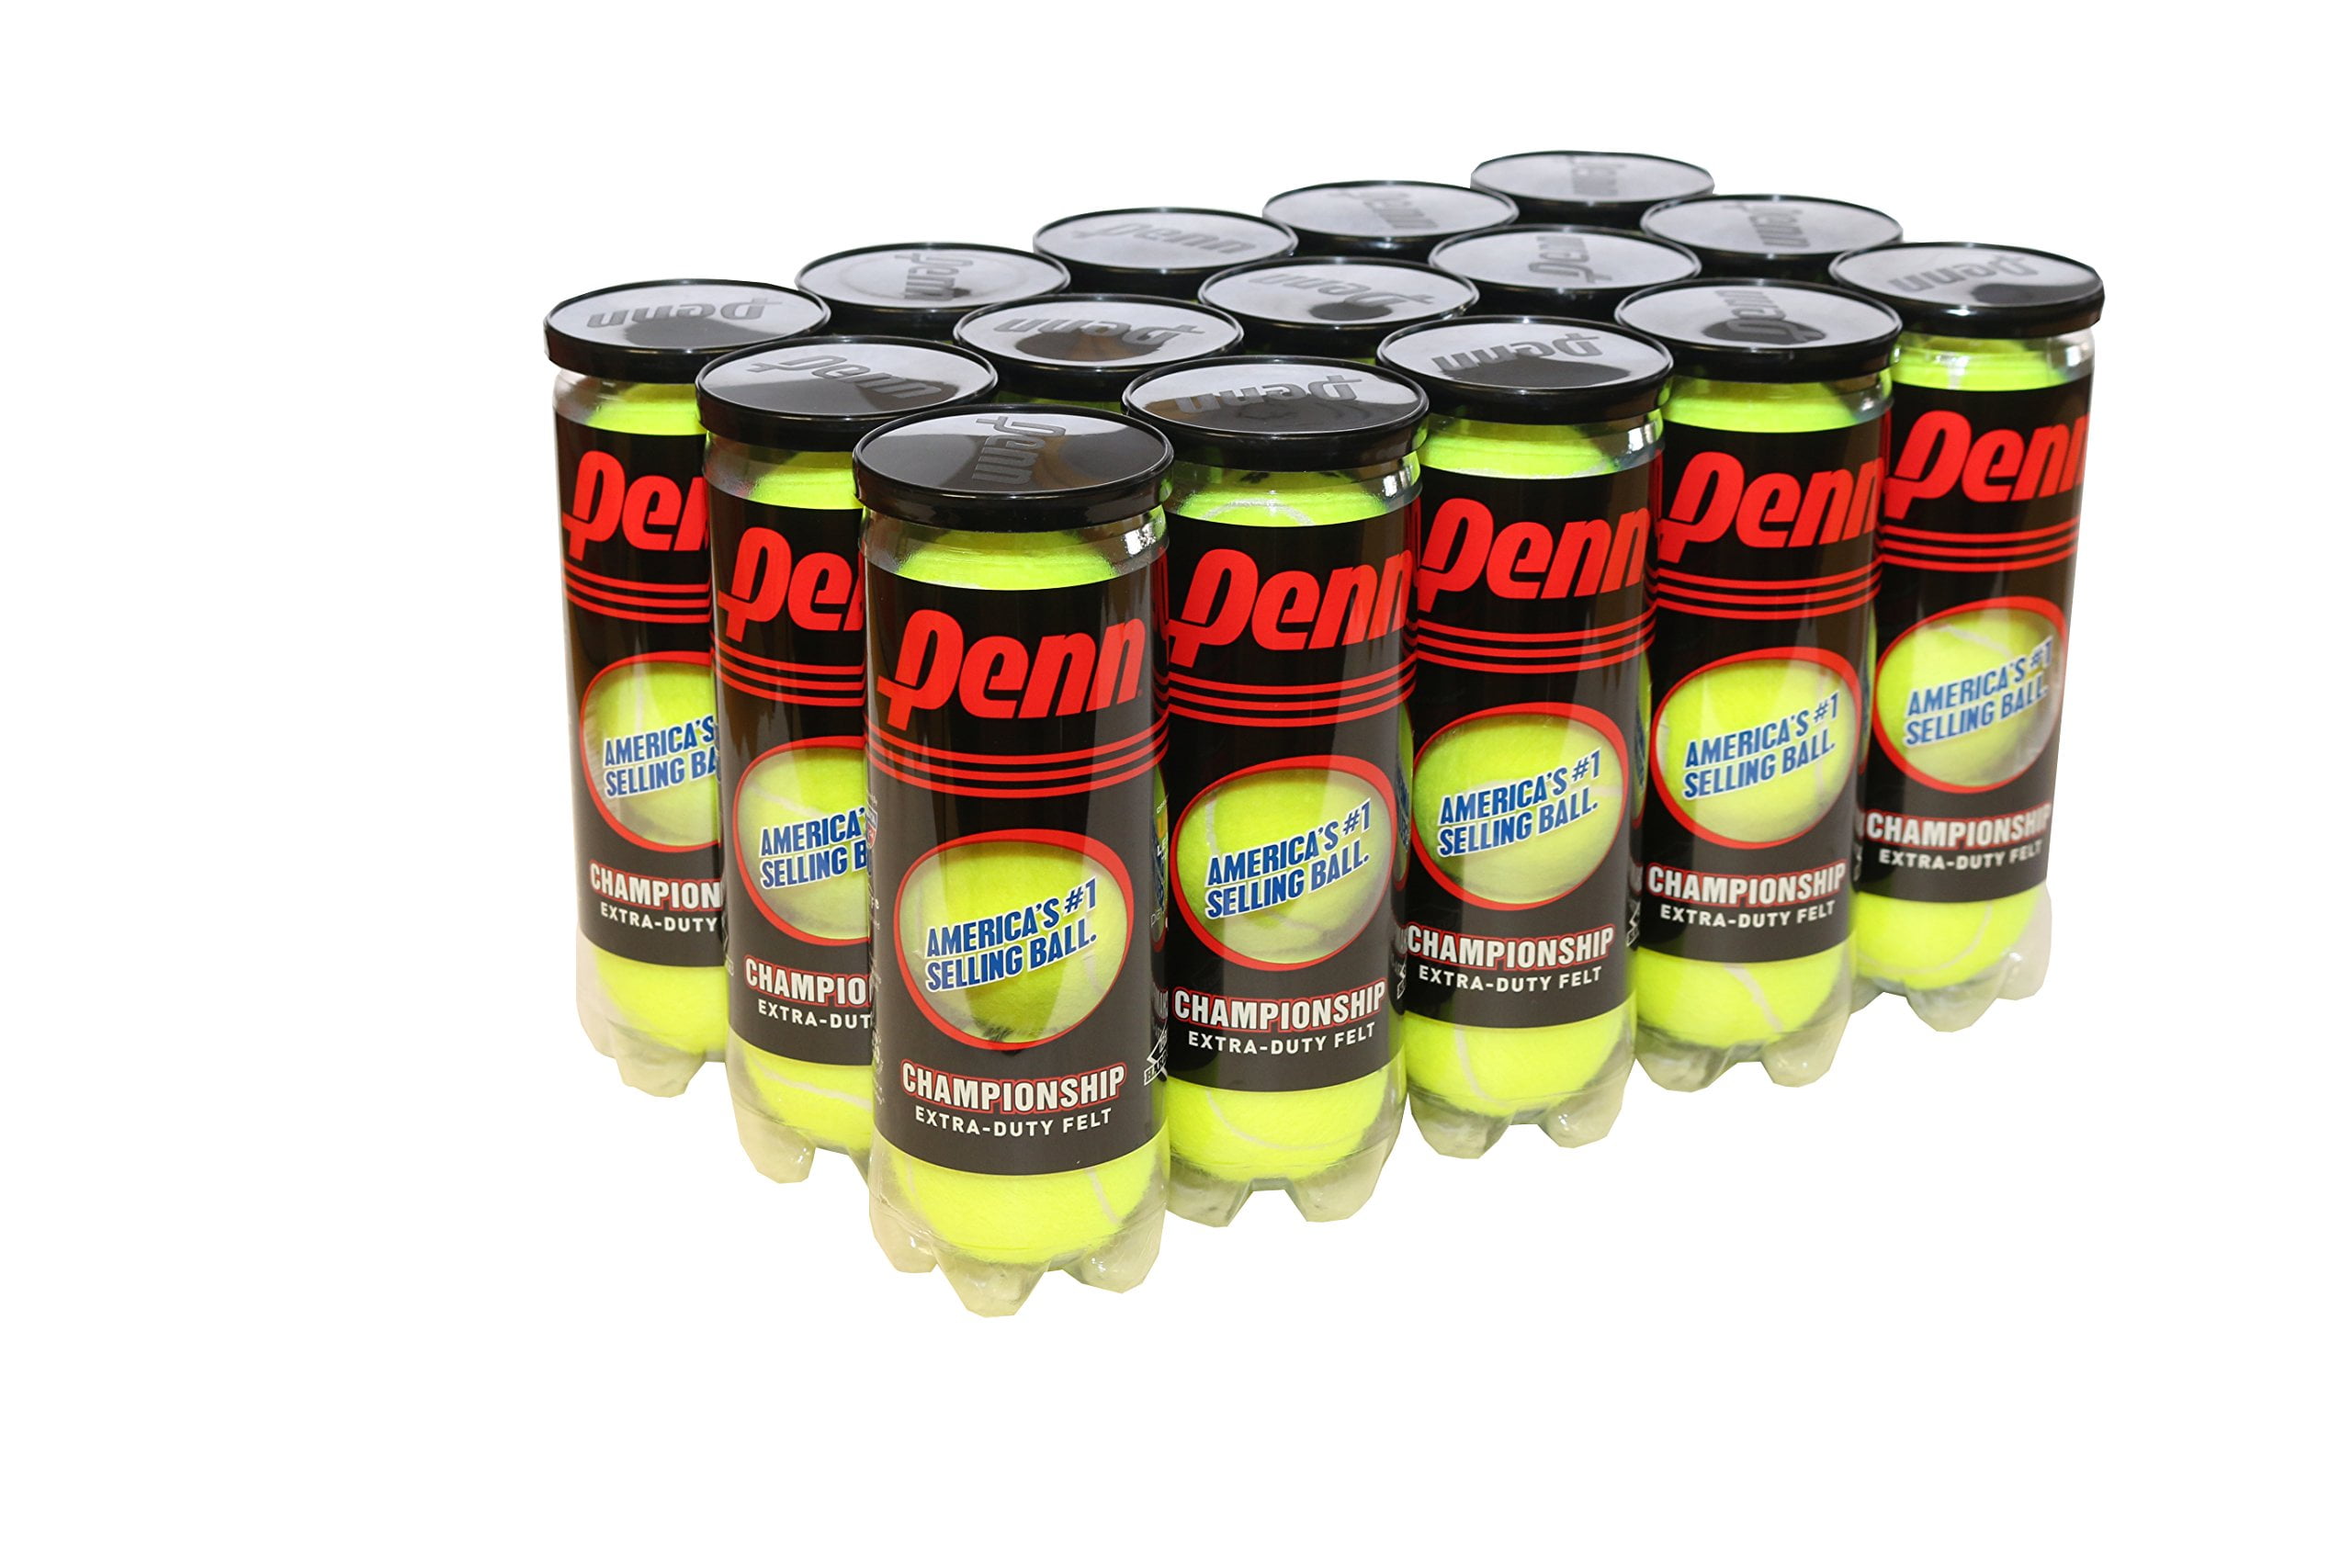 100-400 used tennis balls SHIPS TODAY From $29.95 Support our Mission. 